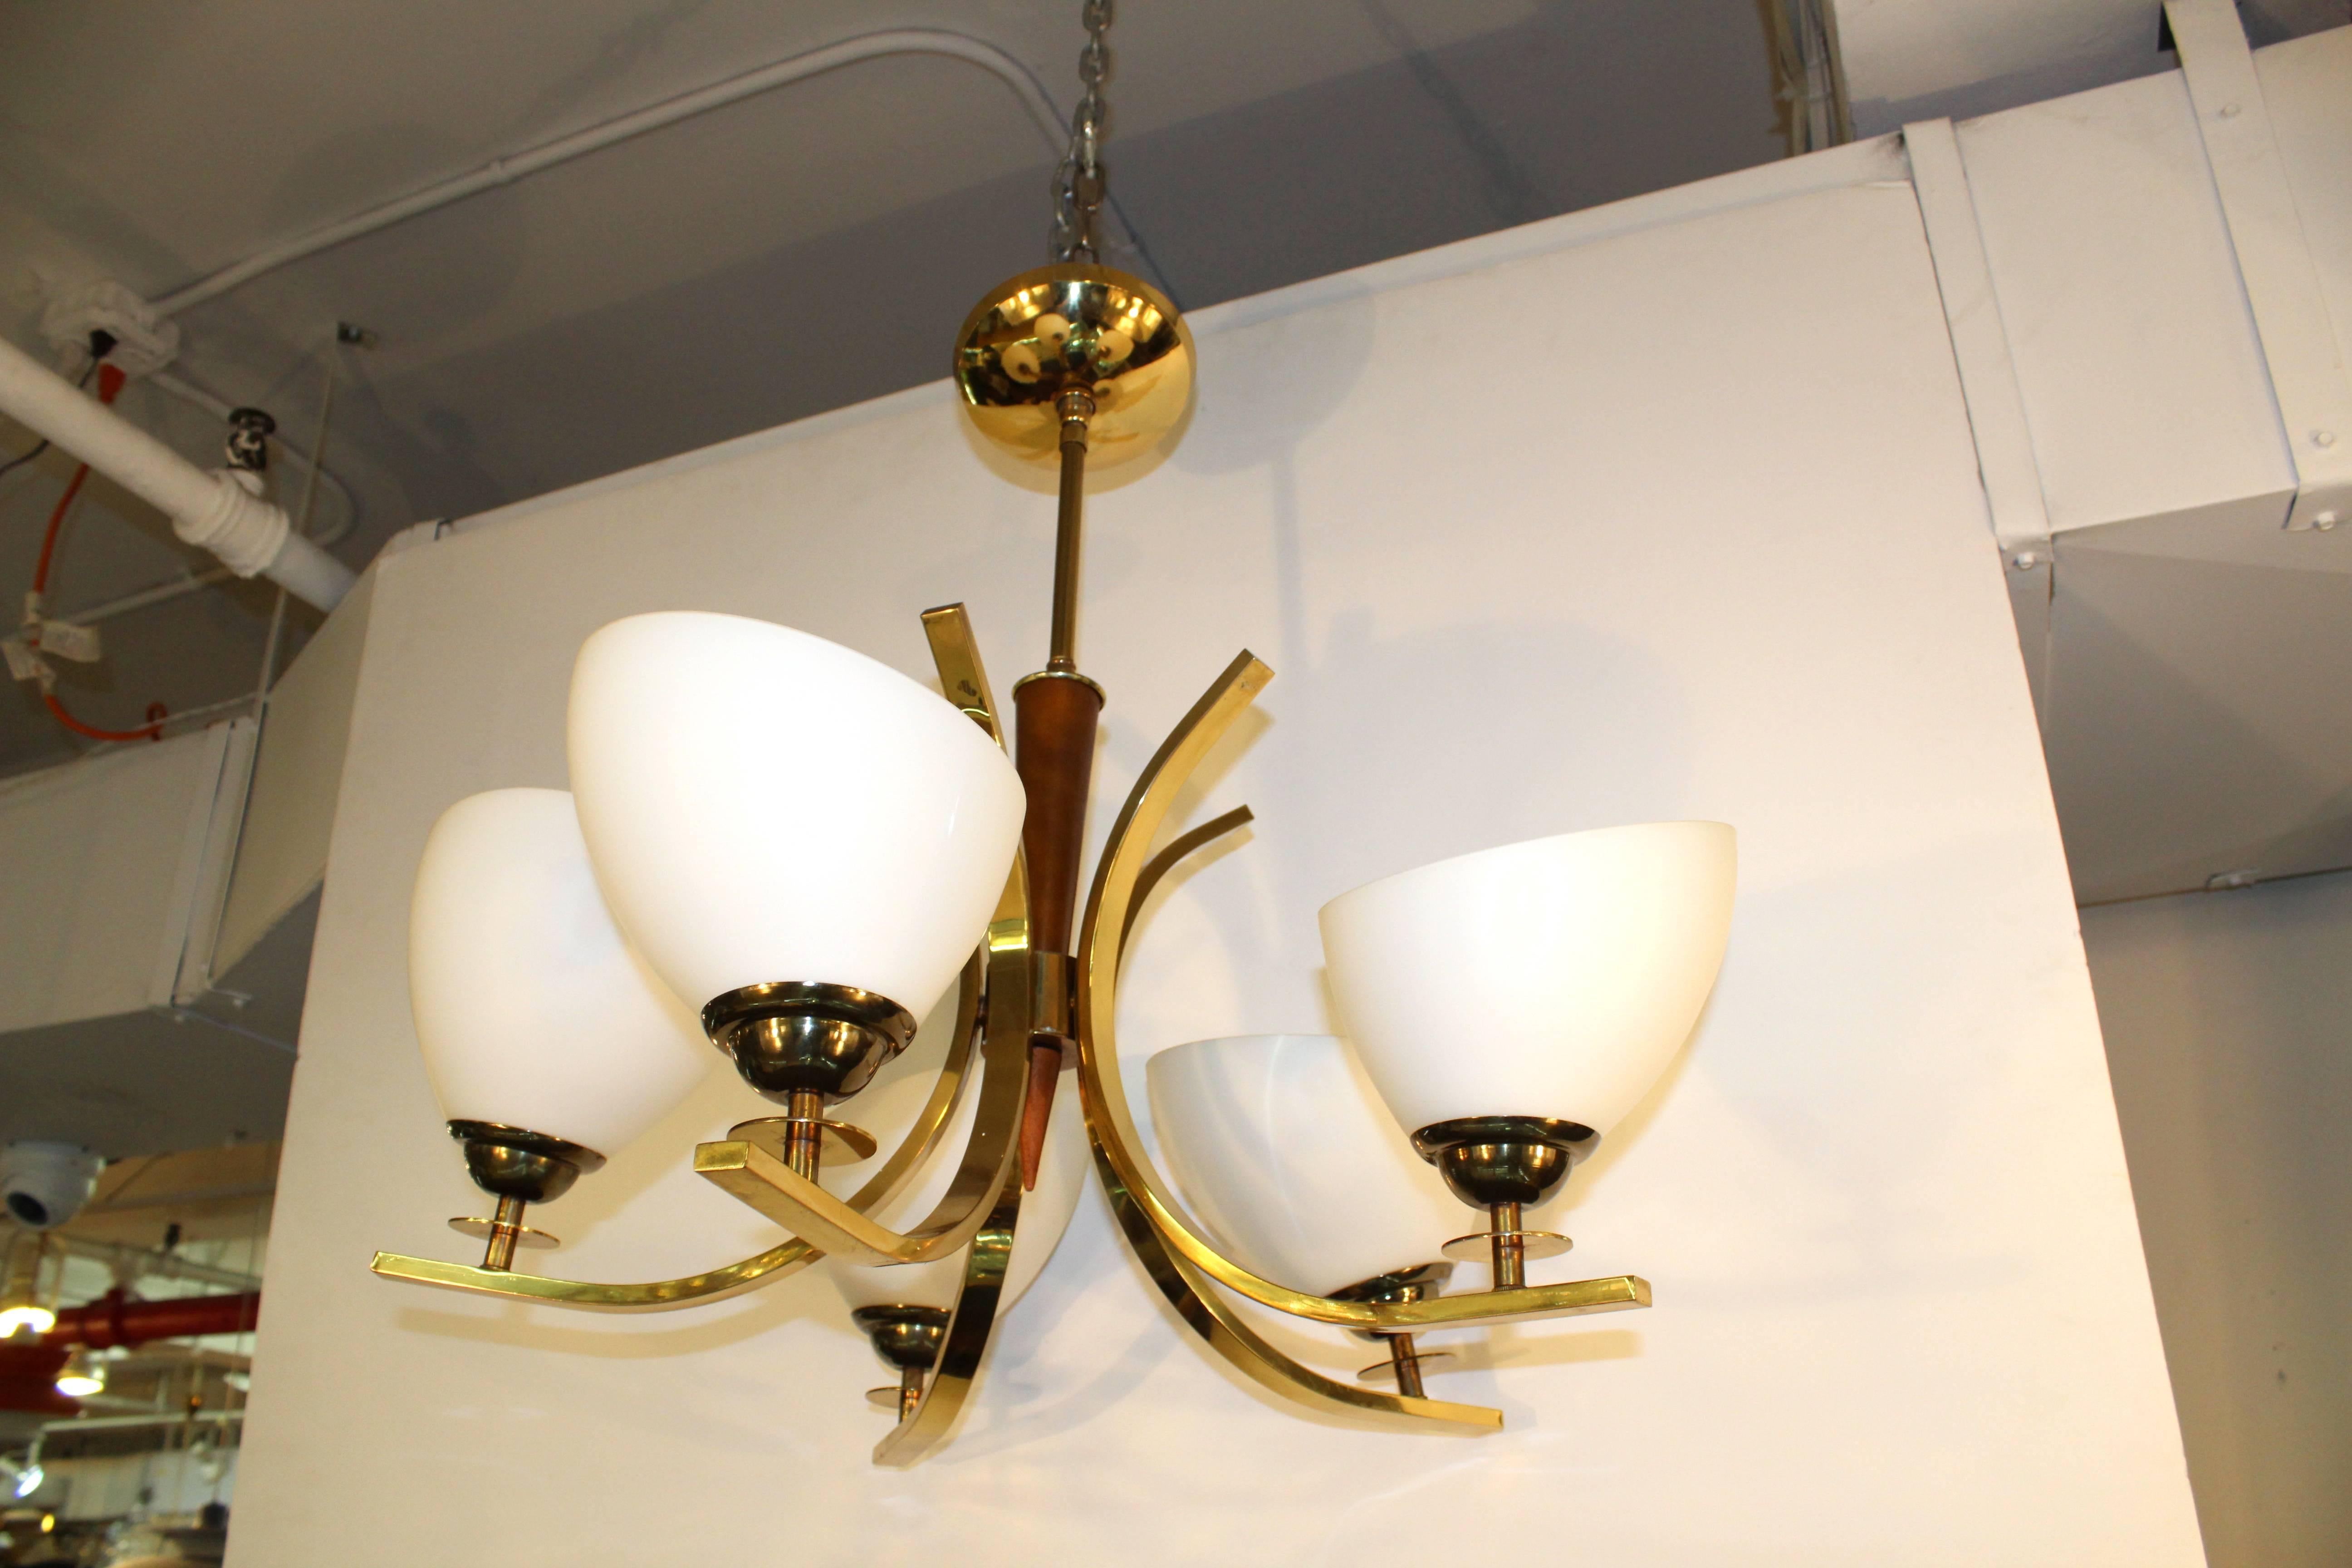 A chandelier with five lights in white opaque glass, polished brass arms and a teak central detail in the Mid-Century Modern style. In excellent condition, with age appropriate wear.

110176.